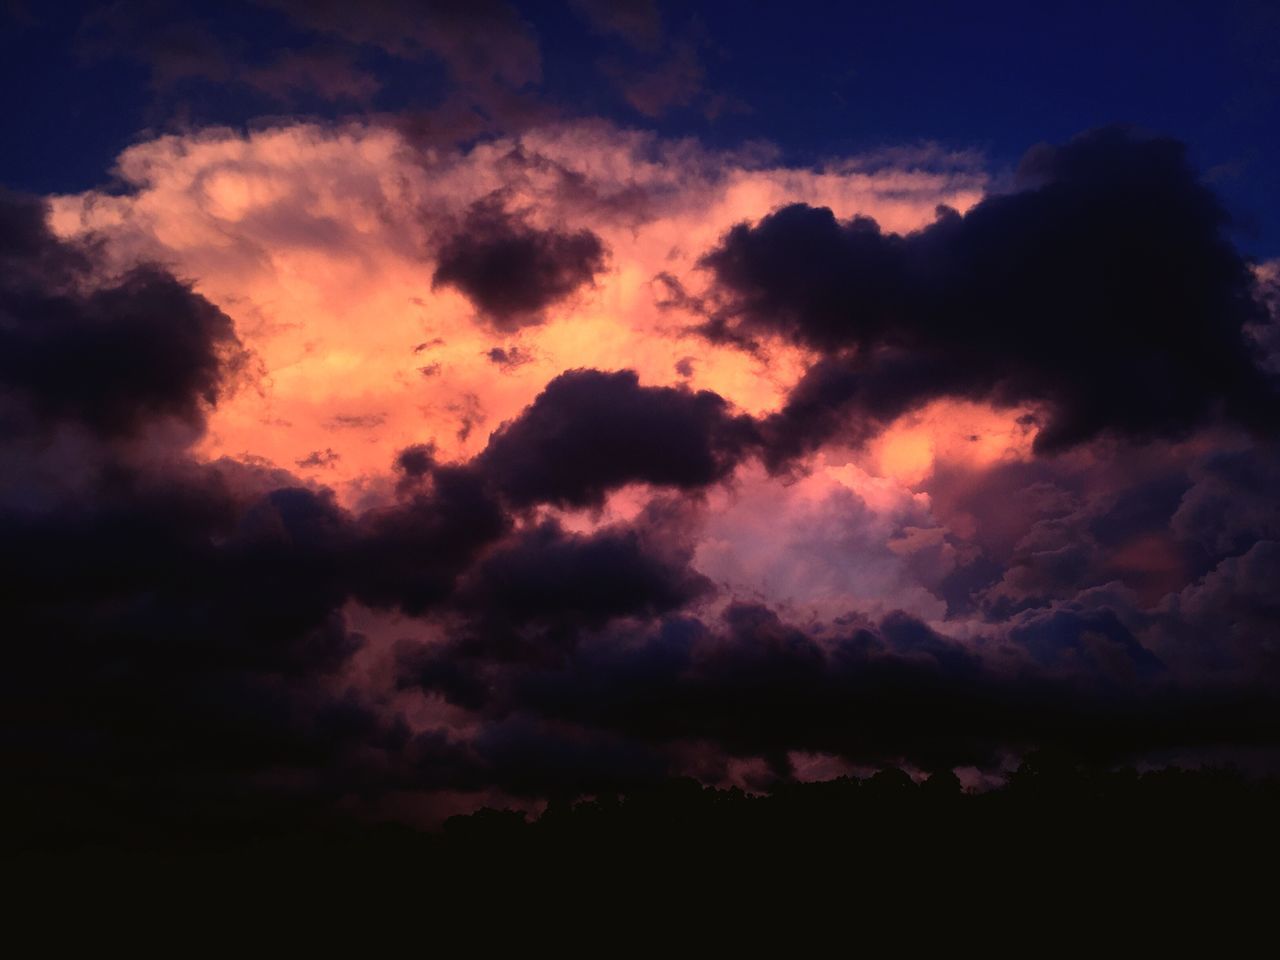 sky, cloud - sky, beauty in nature, scenics, tranquility, tranquil scene, cloudy, cloudscape, silhouette, dramatic sky, nature, weather, sunset, low angle view, overcast, idyllic, cloud, majestic, atmospheric mood, storm cloud